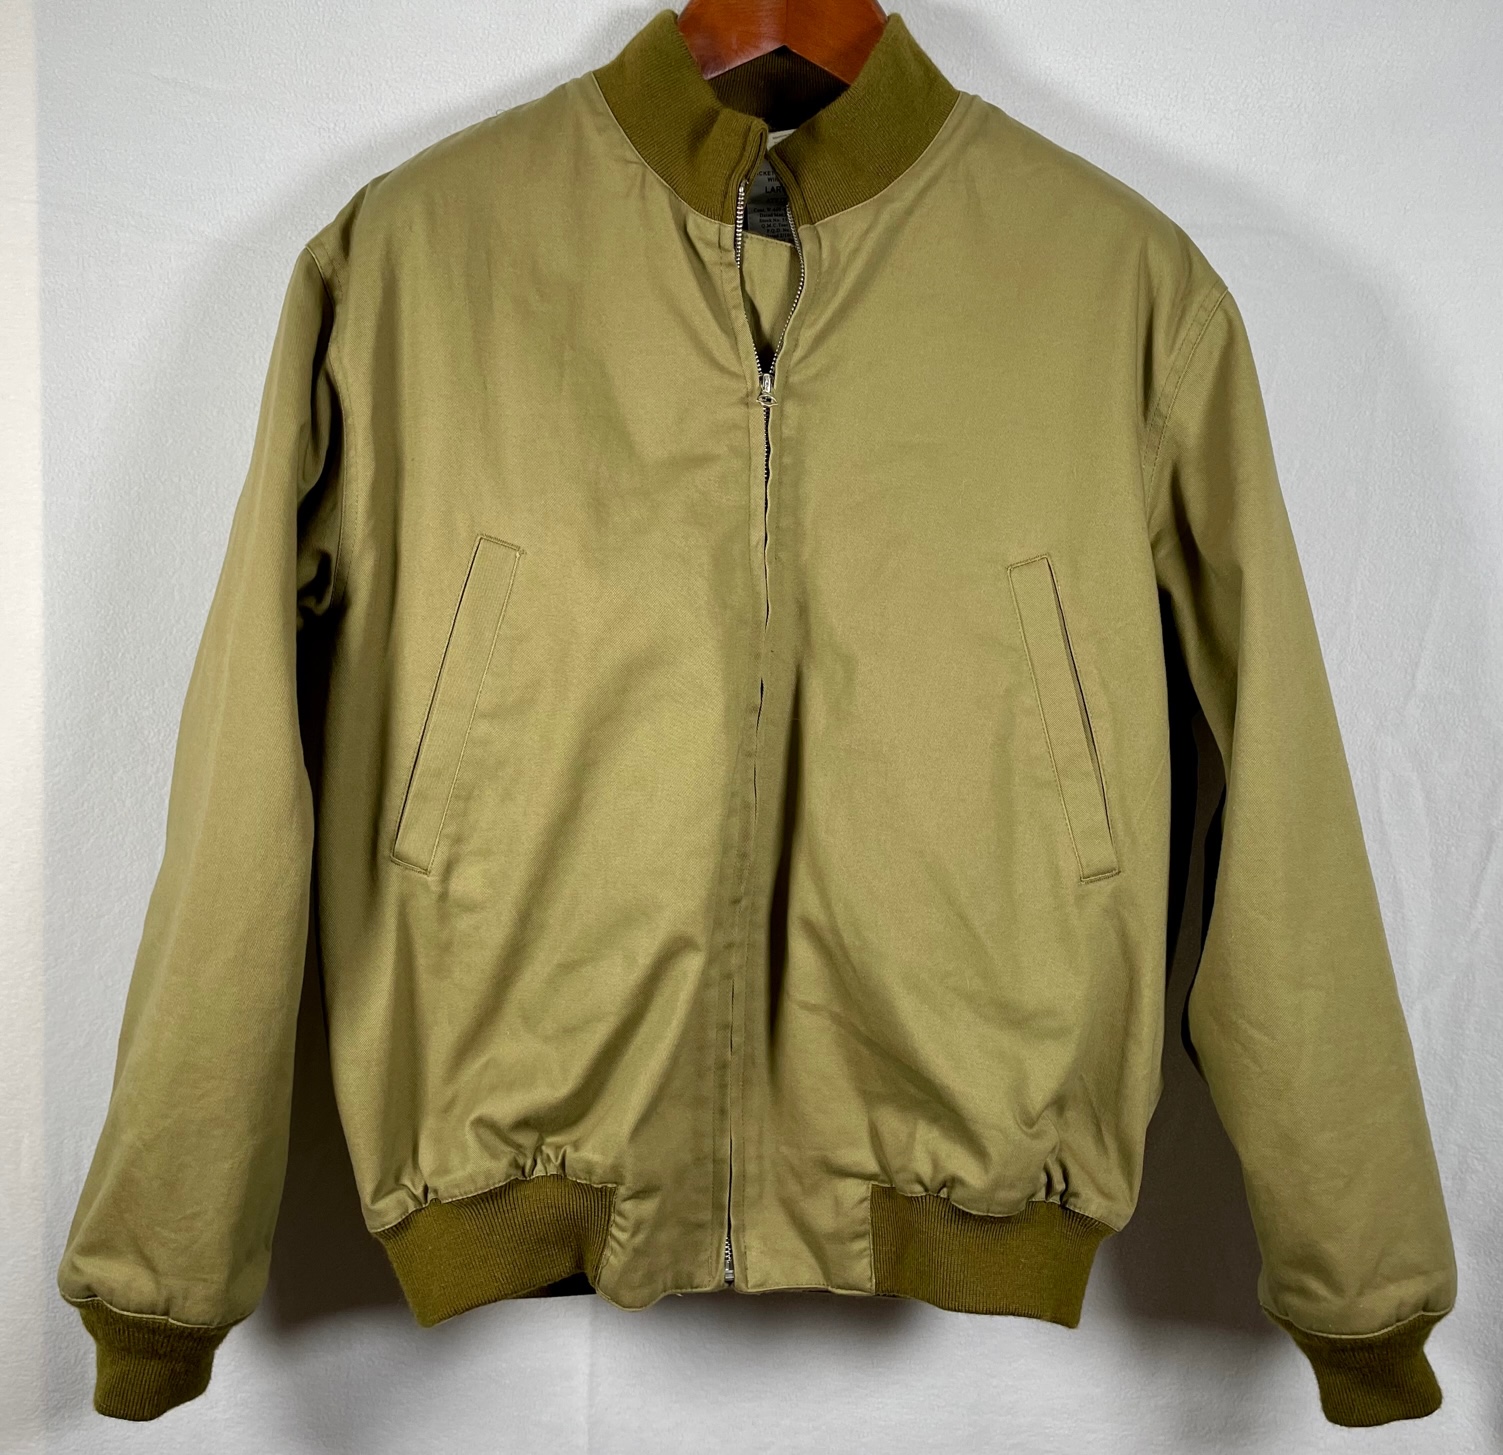 At The Front - Fleece Lined Tanker / Winter Combat Jacket - Large | The ...